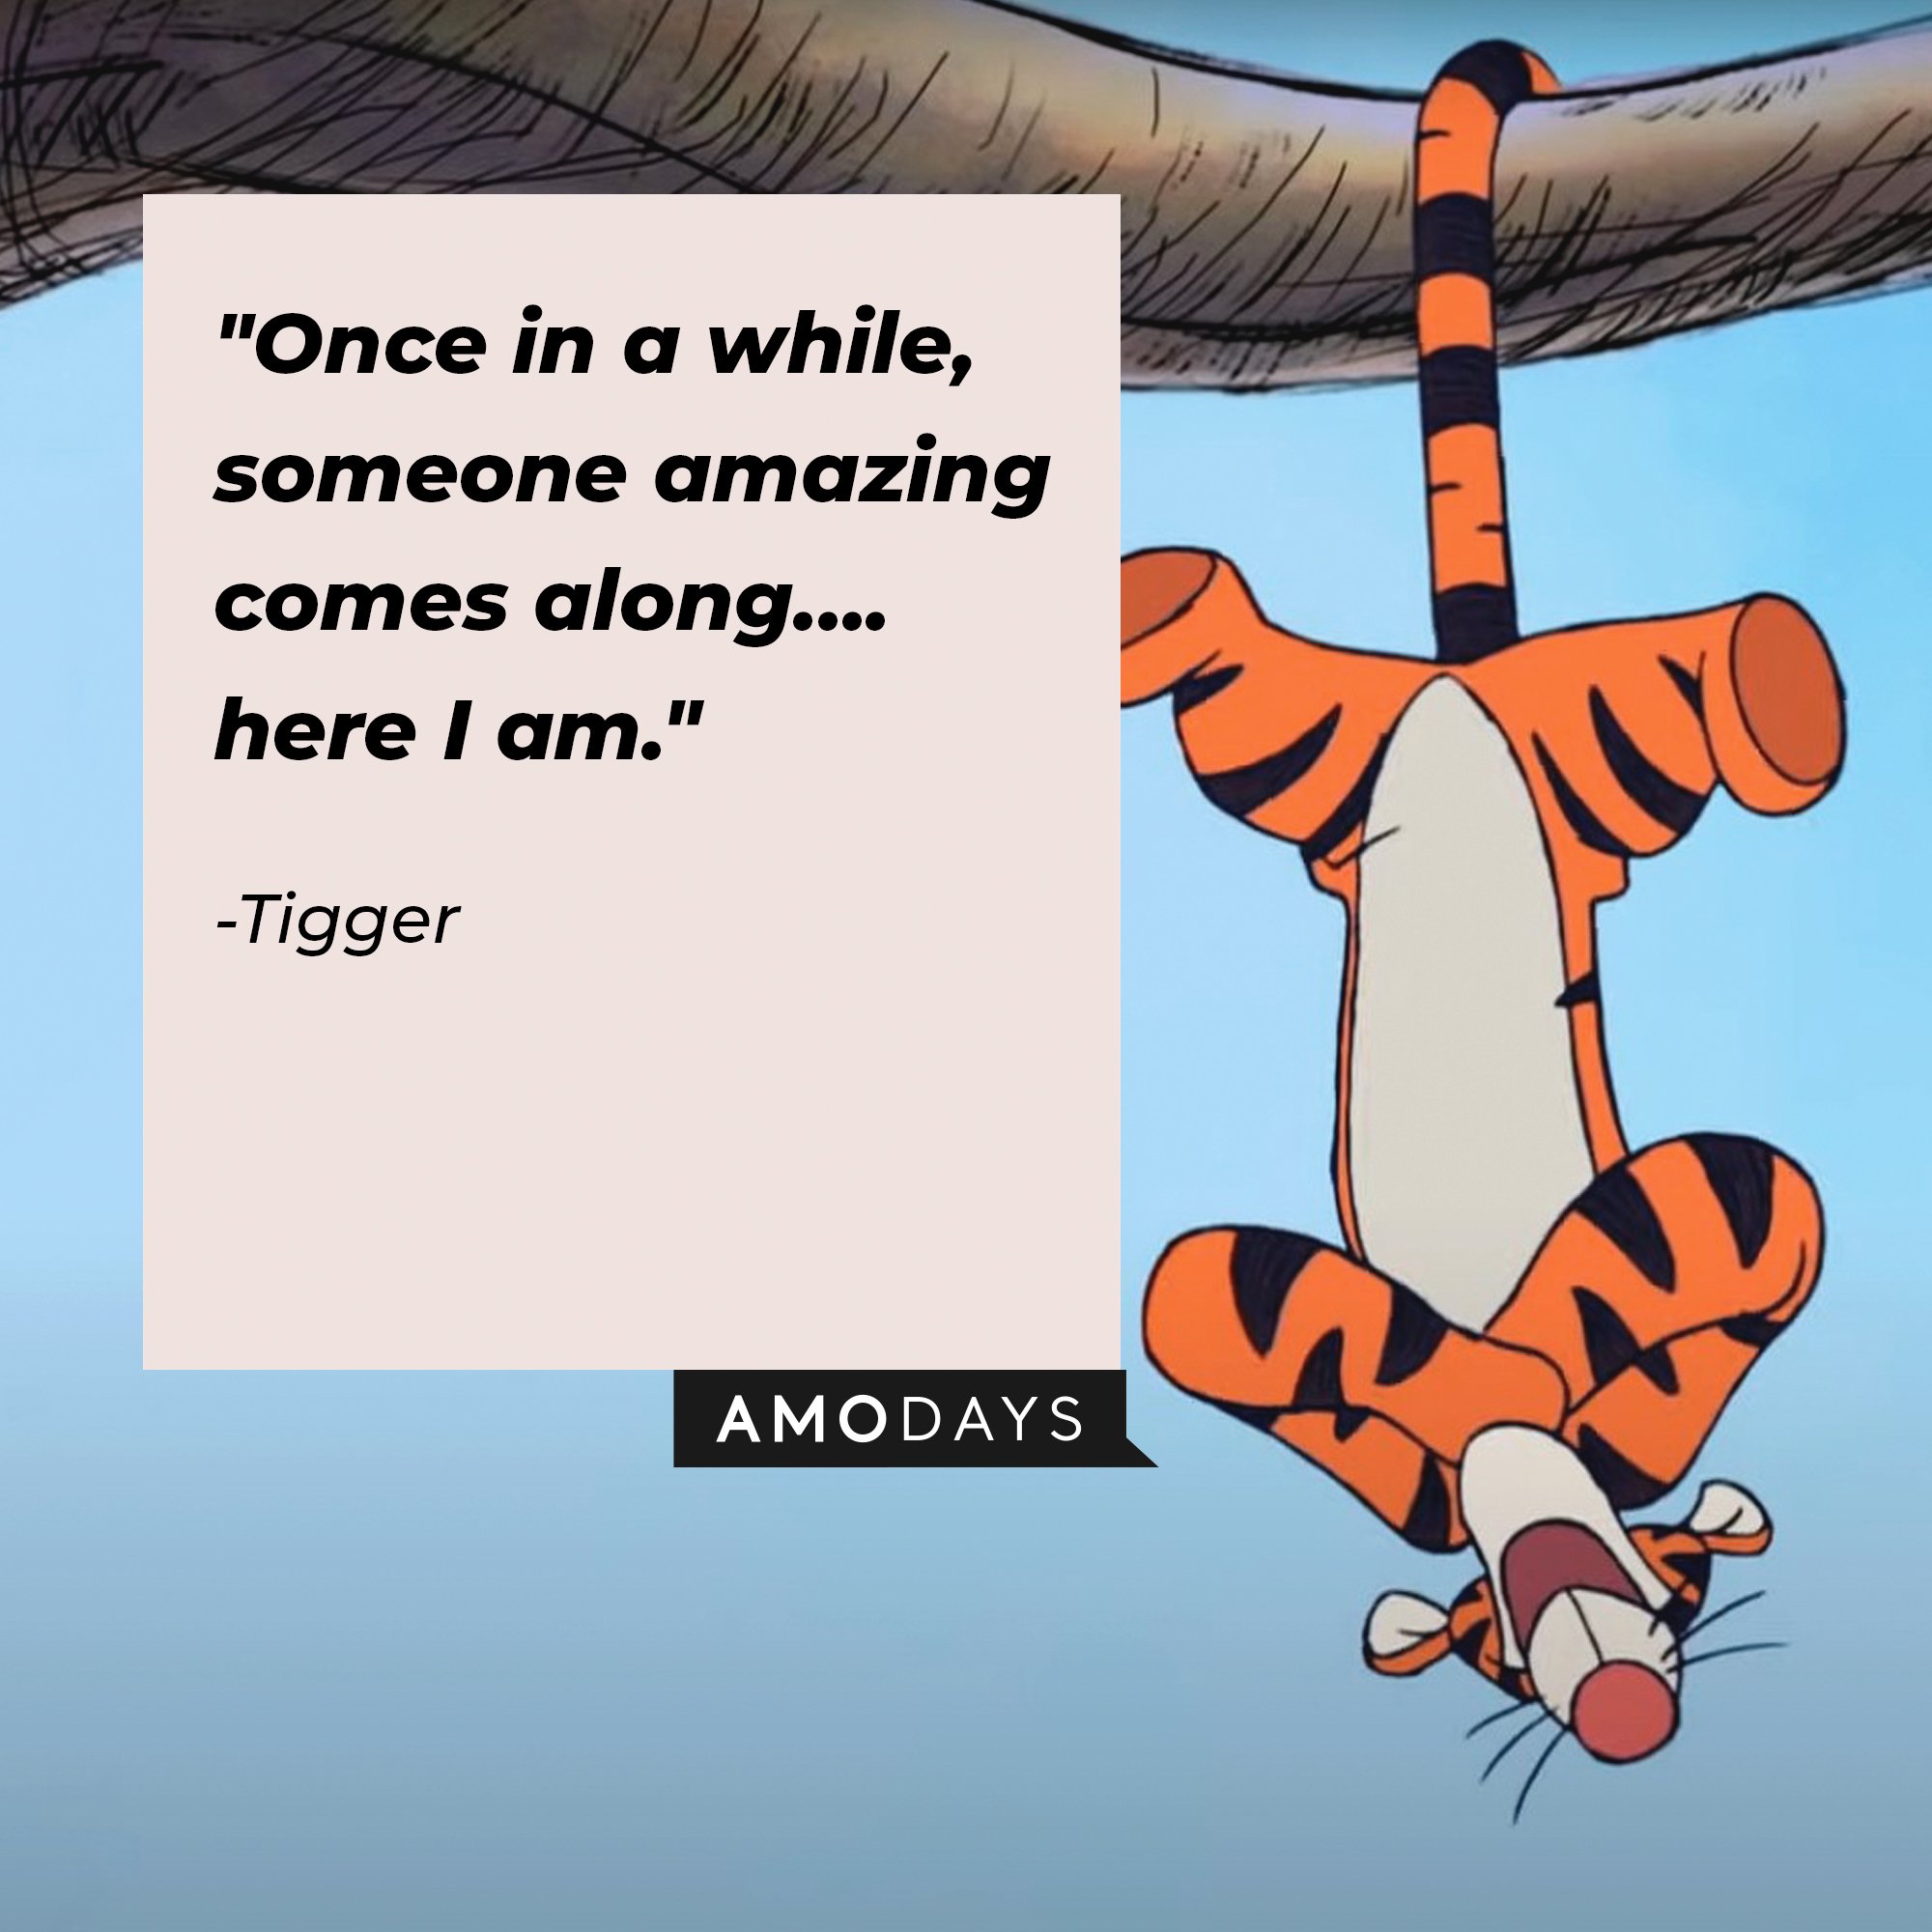 Tigger's quote: "Once in a while, someone amazing comes along….here I am." | Image: AmoDays